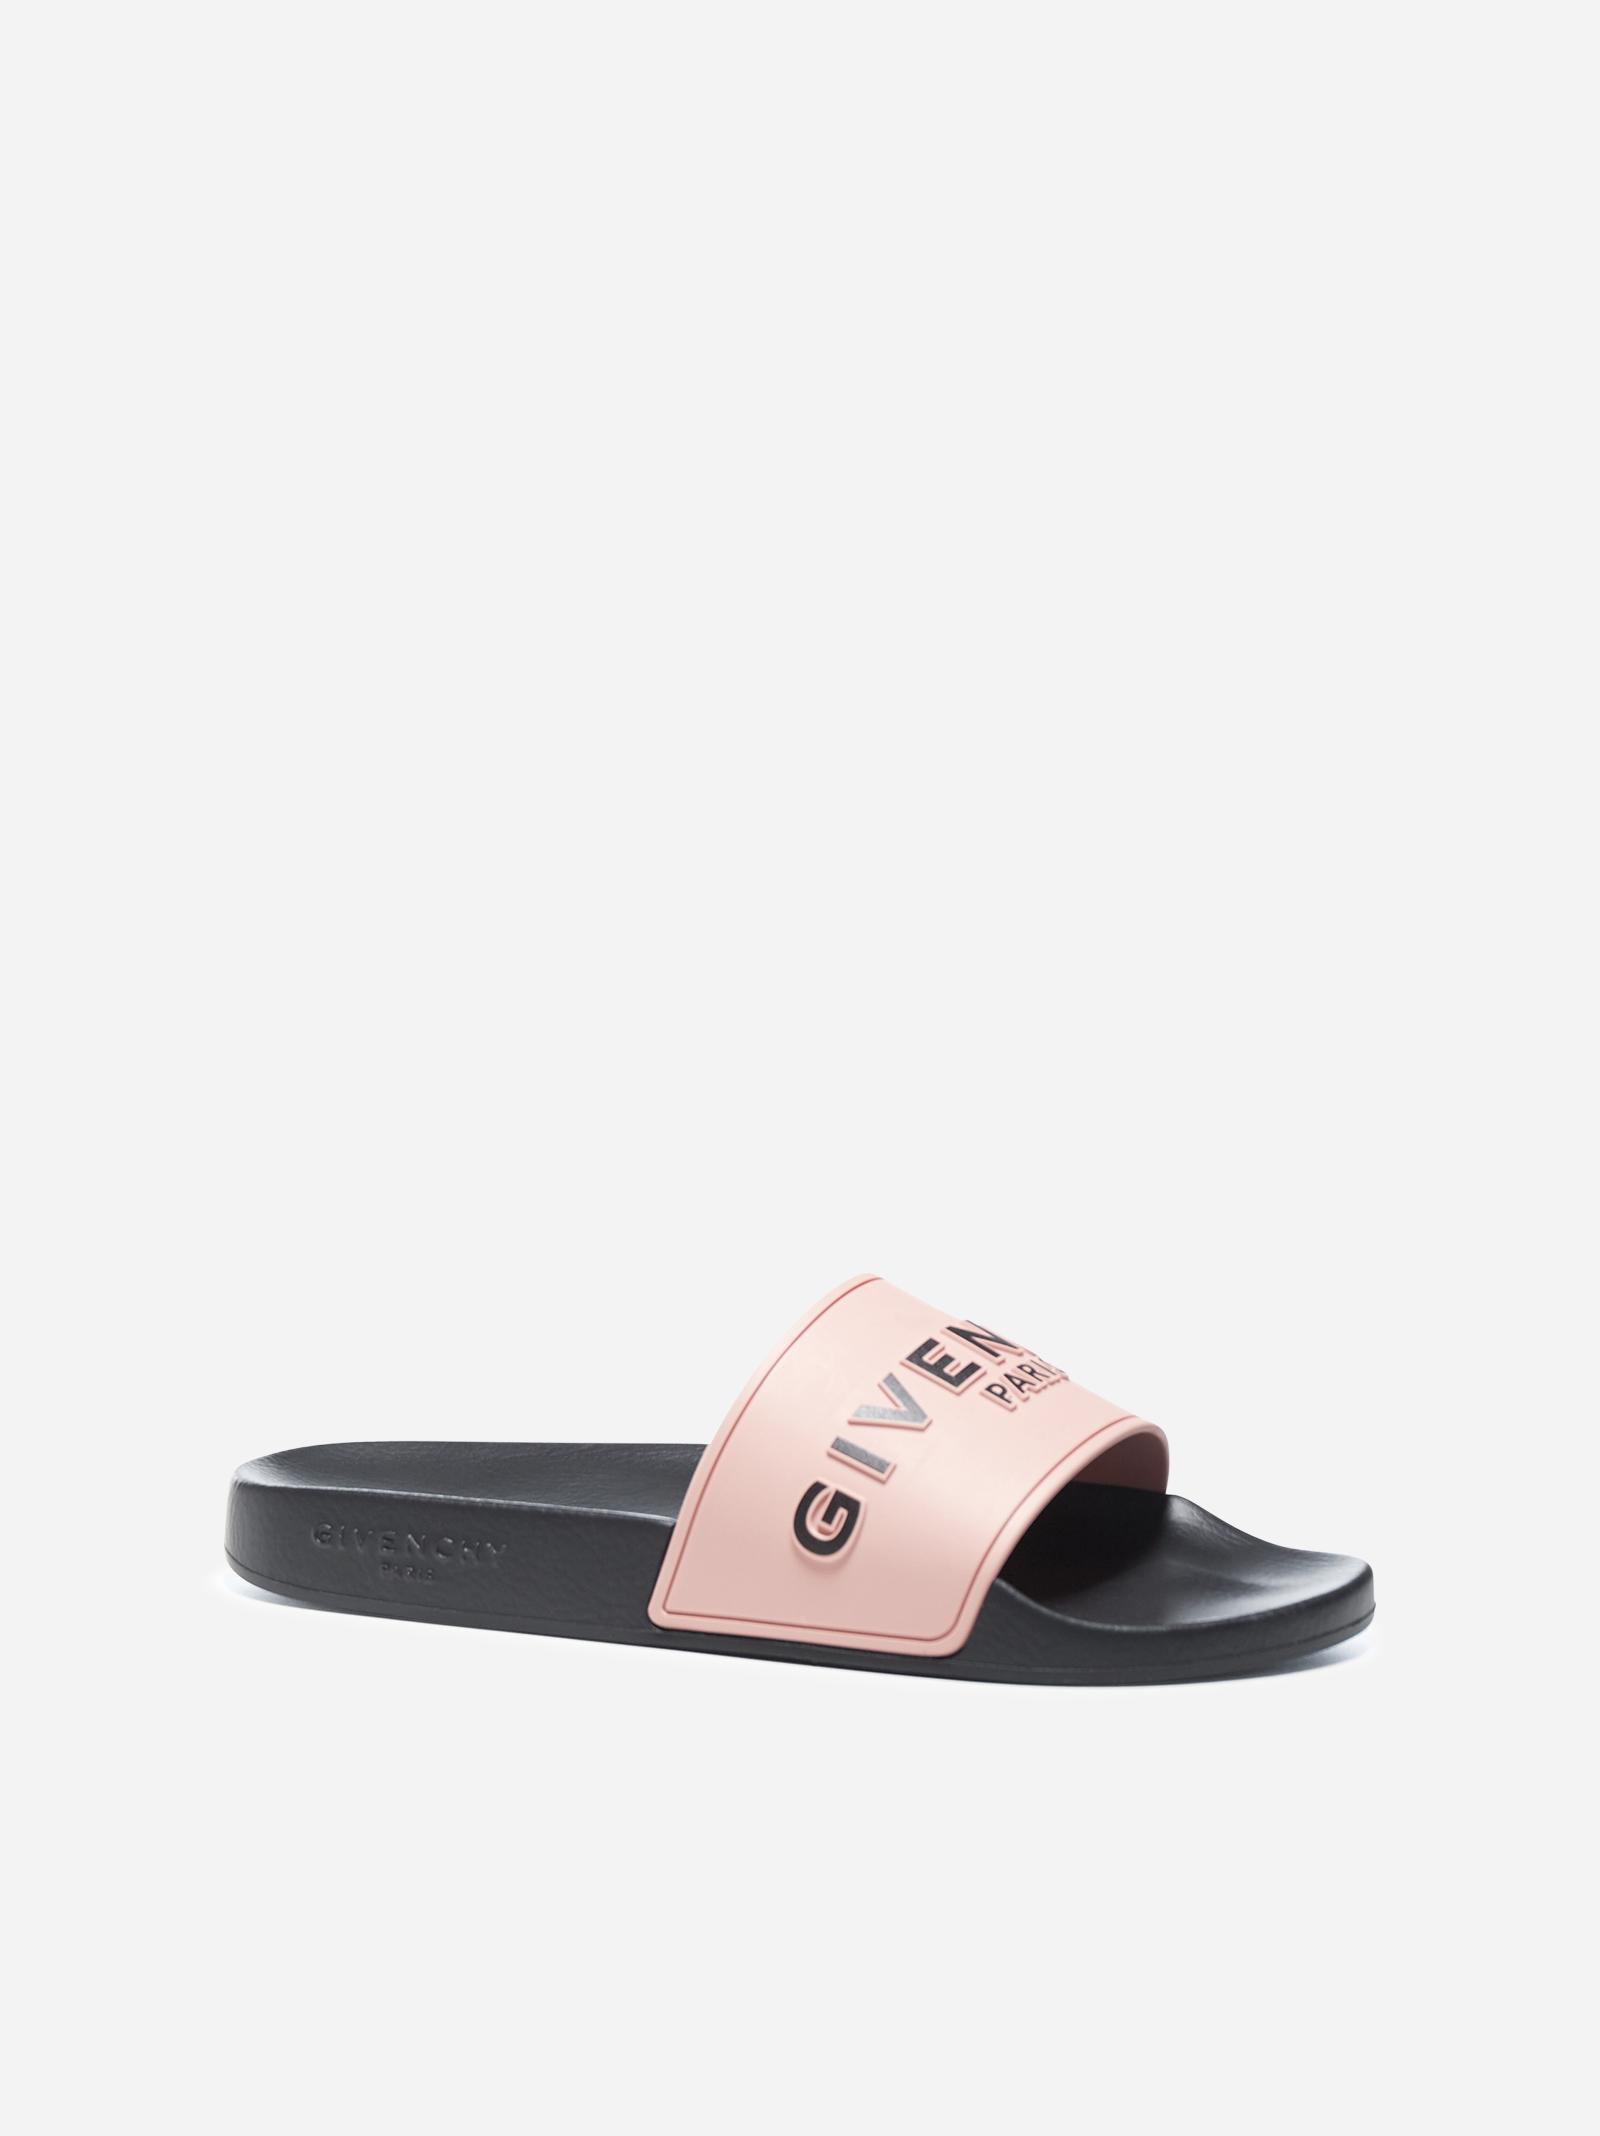 givenchy slides womens